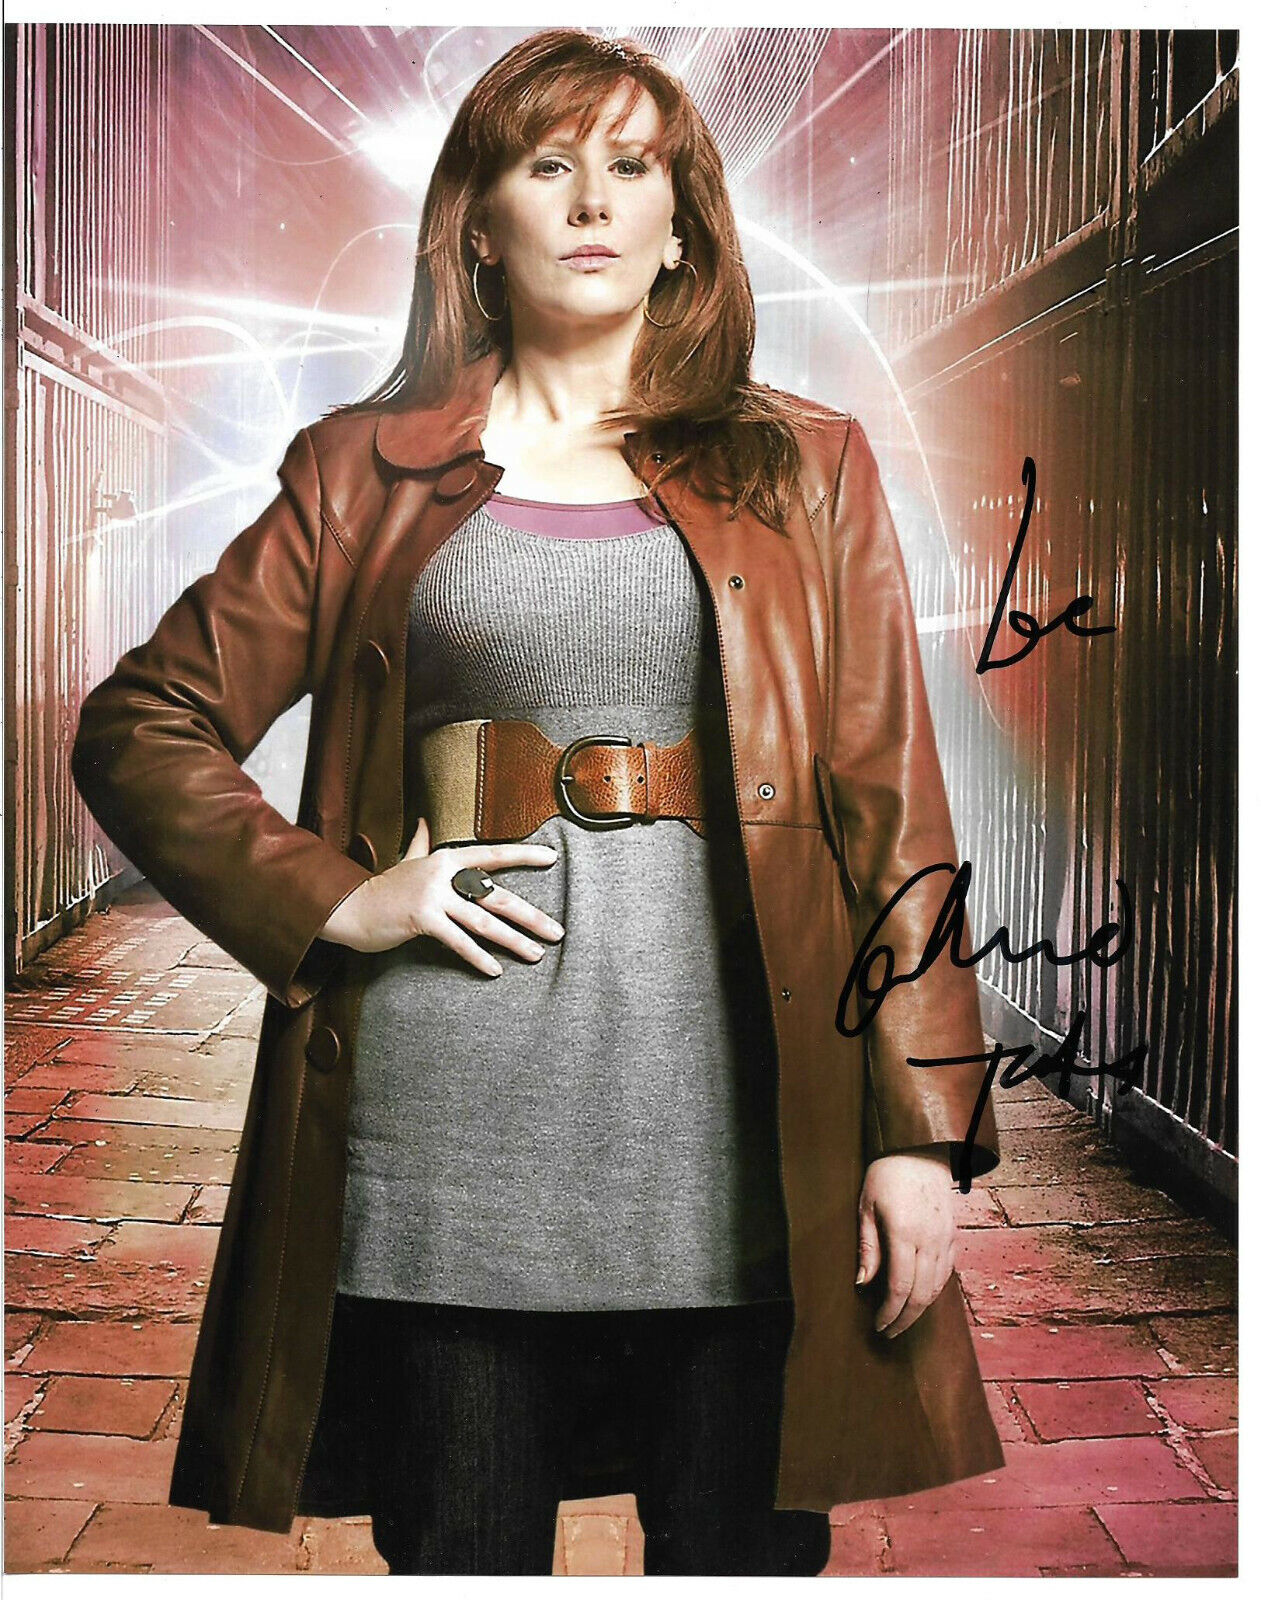 Catherine Tate Authentic Signed 8x10 Photo Poster painting Autographed, Dr. Who, Donna Noble